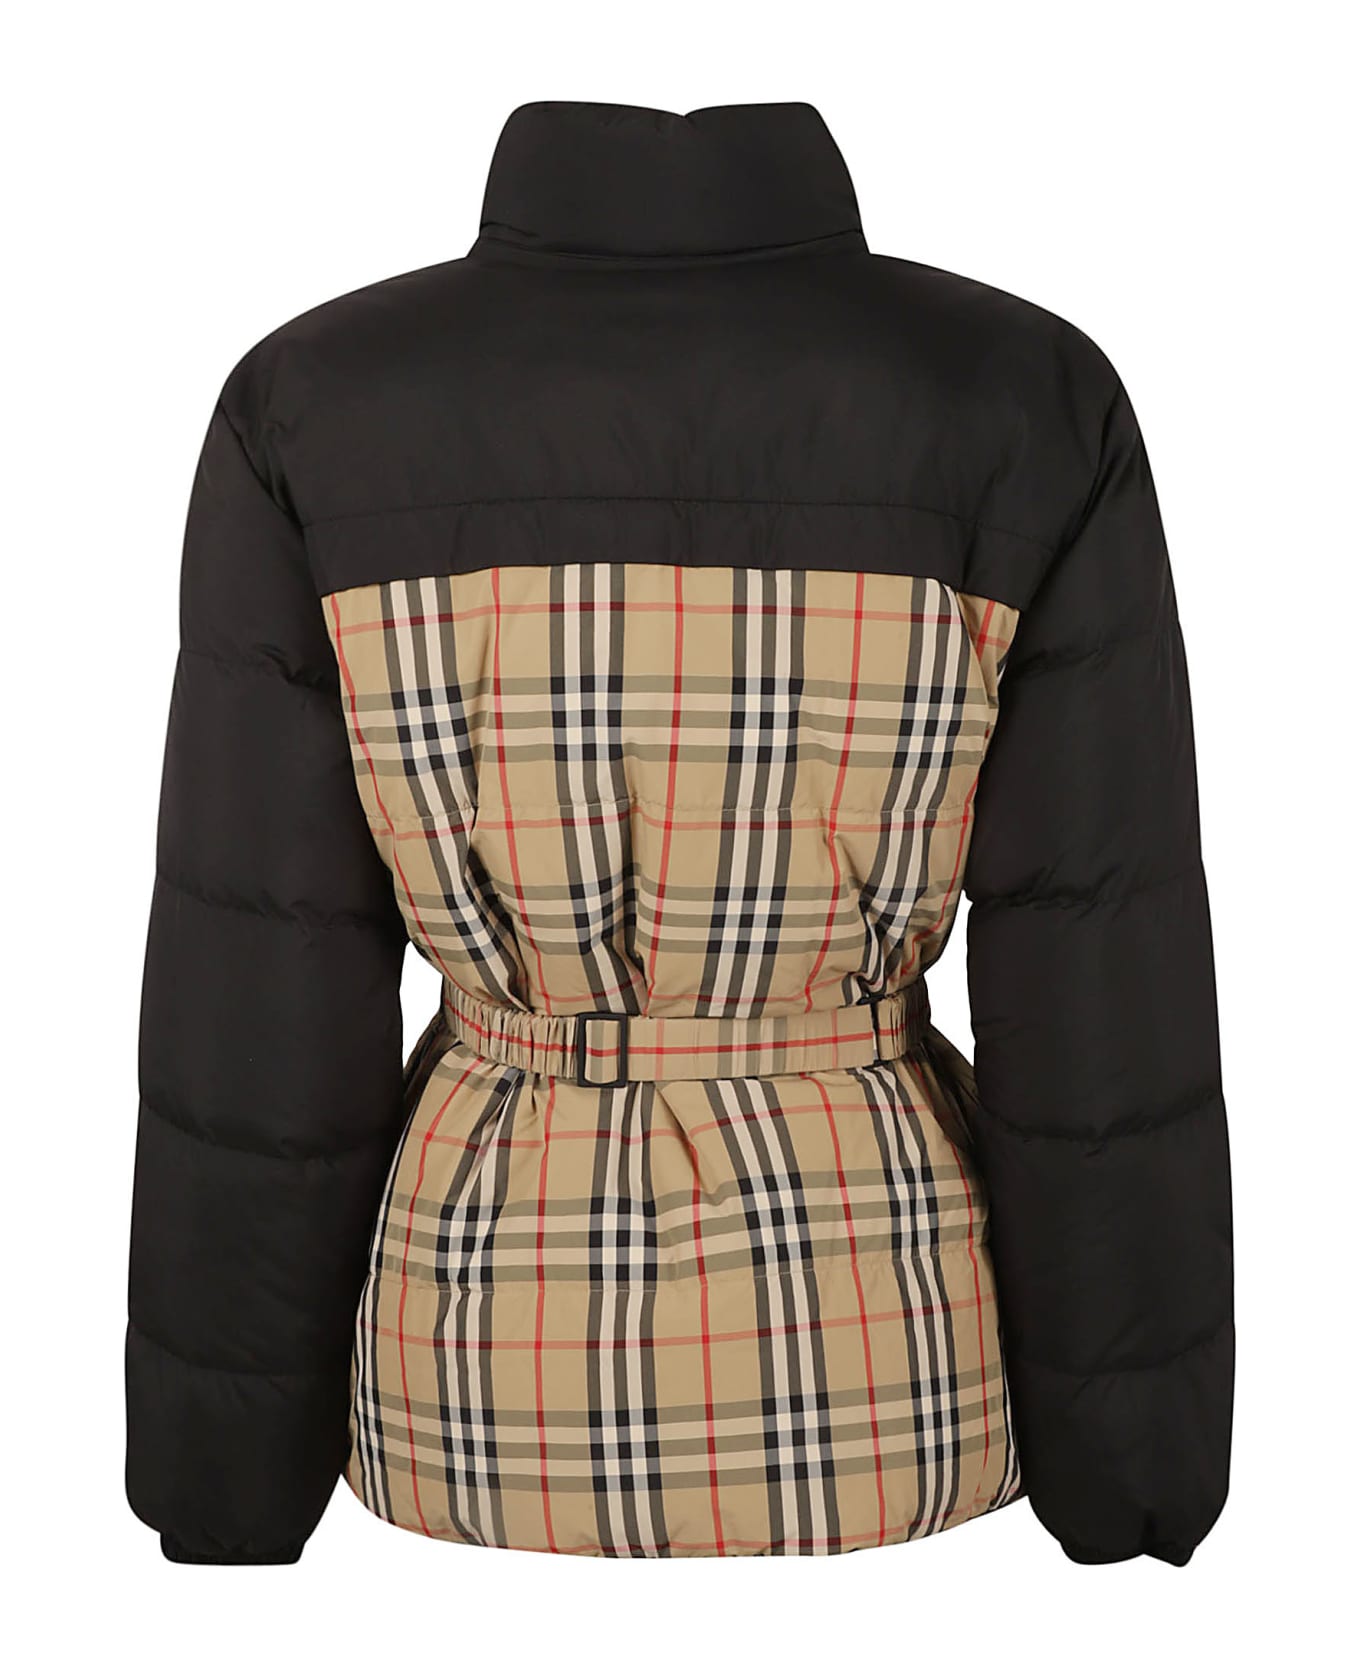 Burberry Fitted Waist Belted Padded Jacket - Archive Beige Ip Chk ダウンジャケット